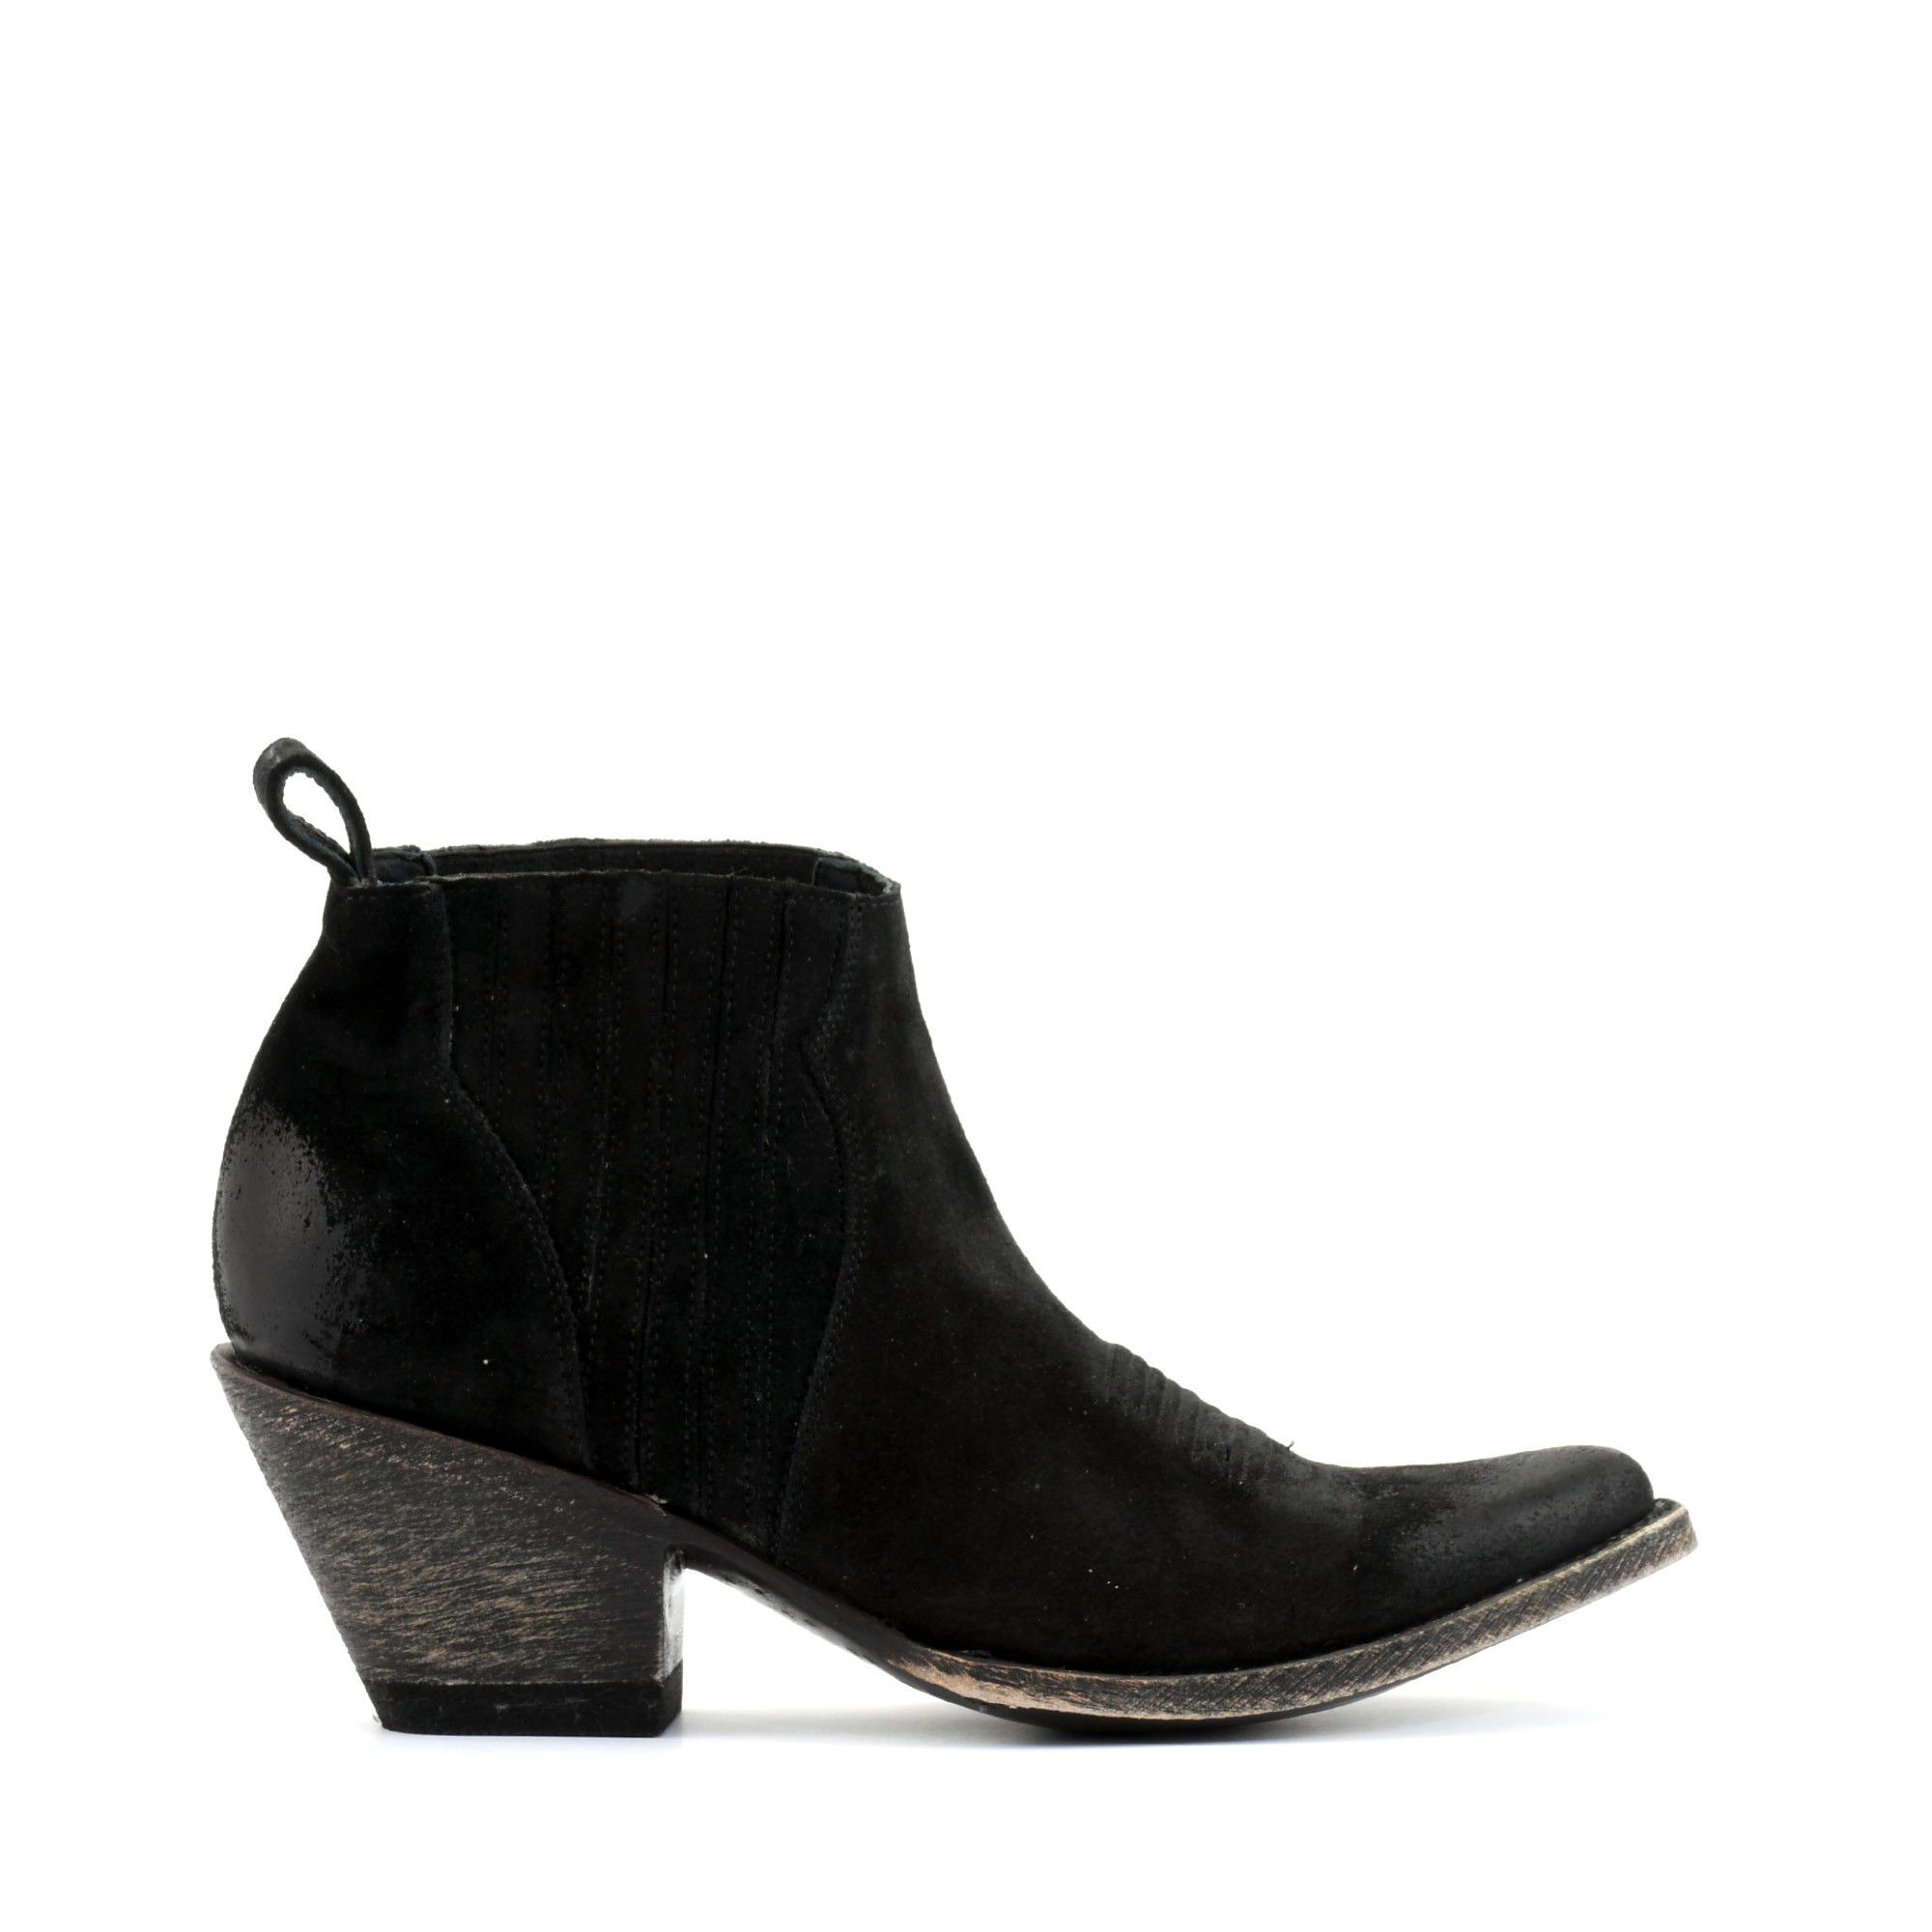 KRISTINNE BLACK TEA SUEDE POINTED TOE ANKLE BOOTS WITH COWBOY STYLE  STITCHING AND ELASTICIZED SIDES PANEL   Total heel height 2